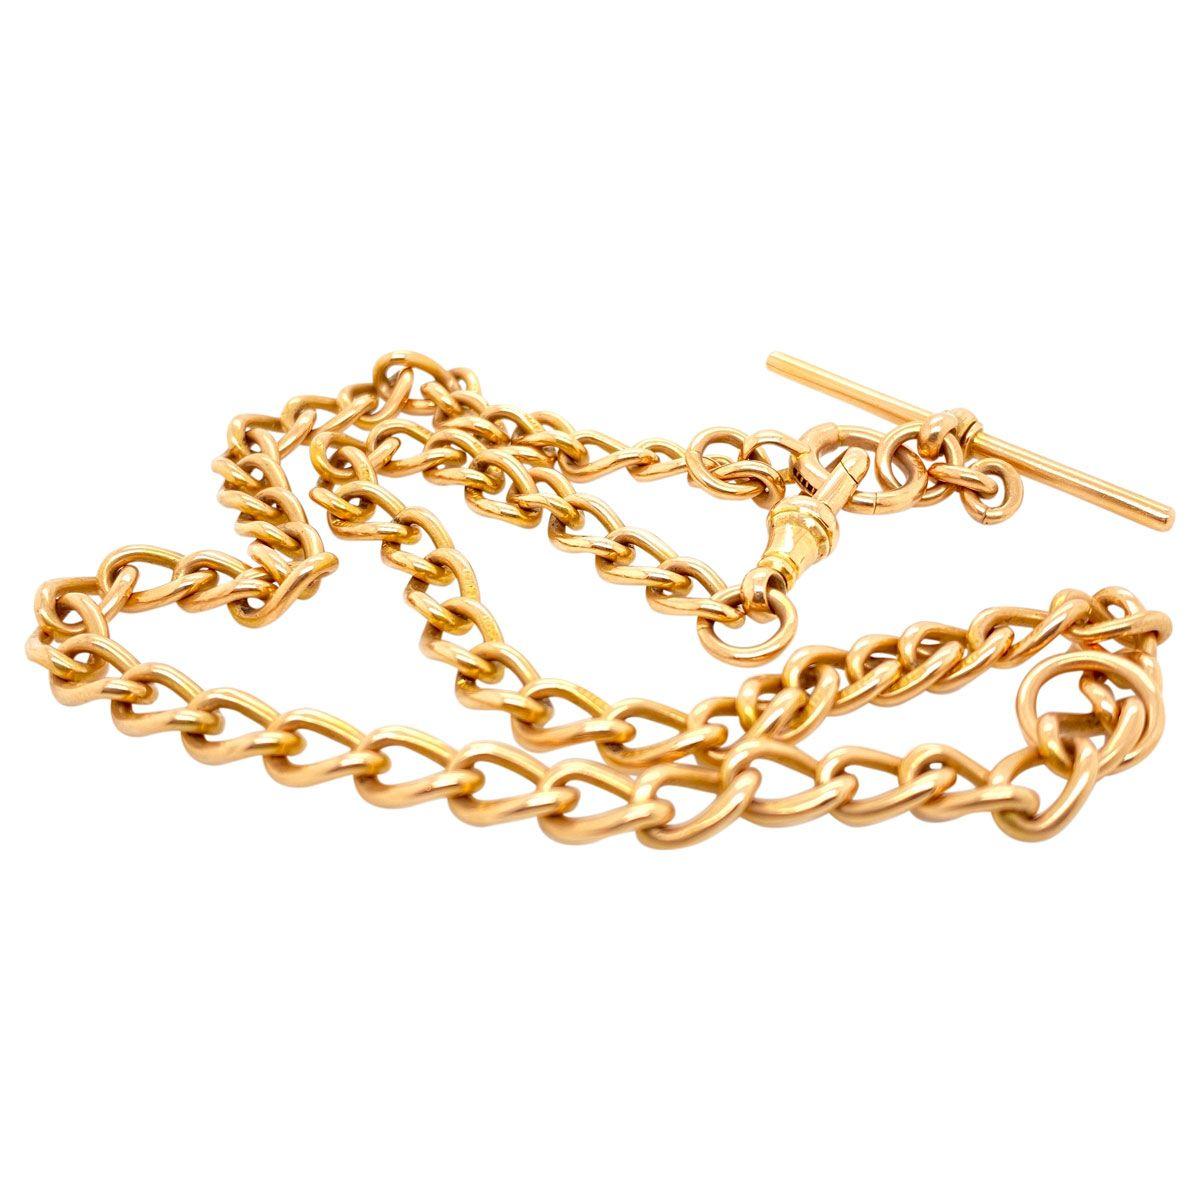 Victorian 15 Karat Yellow Gold English Fob Curb Link Chain Necklace